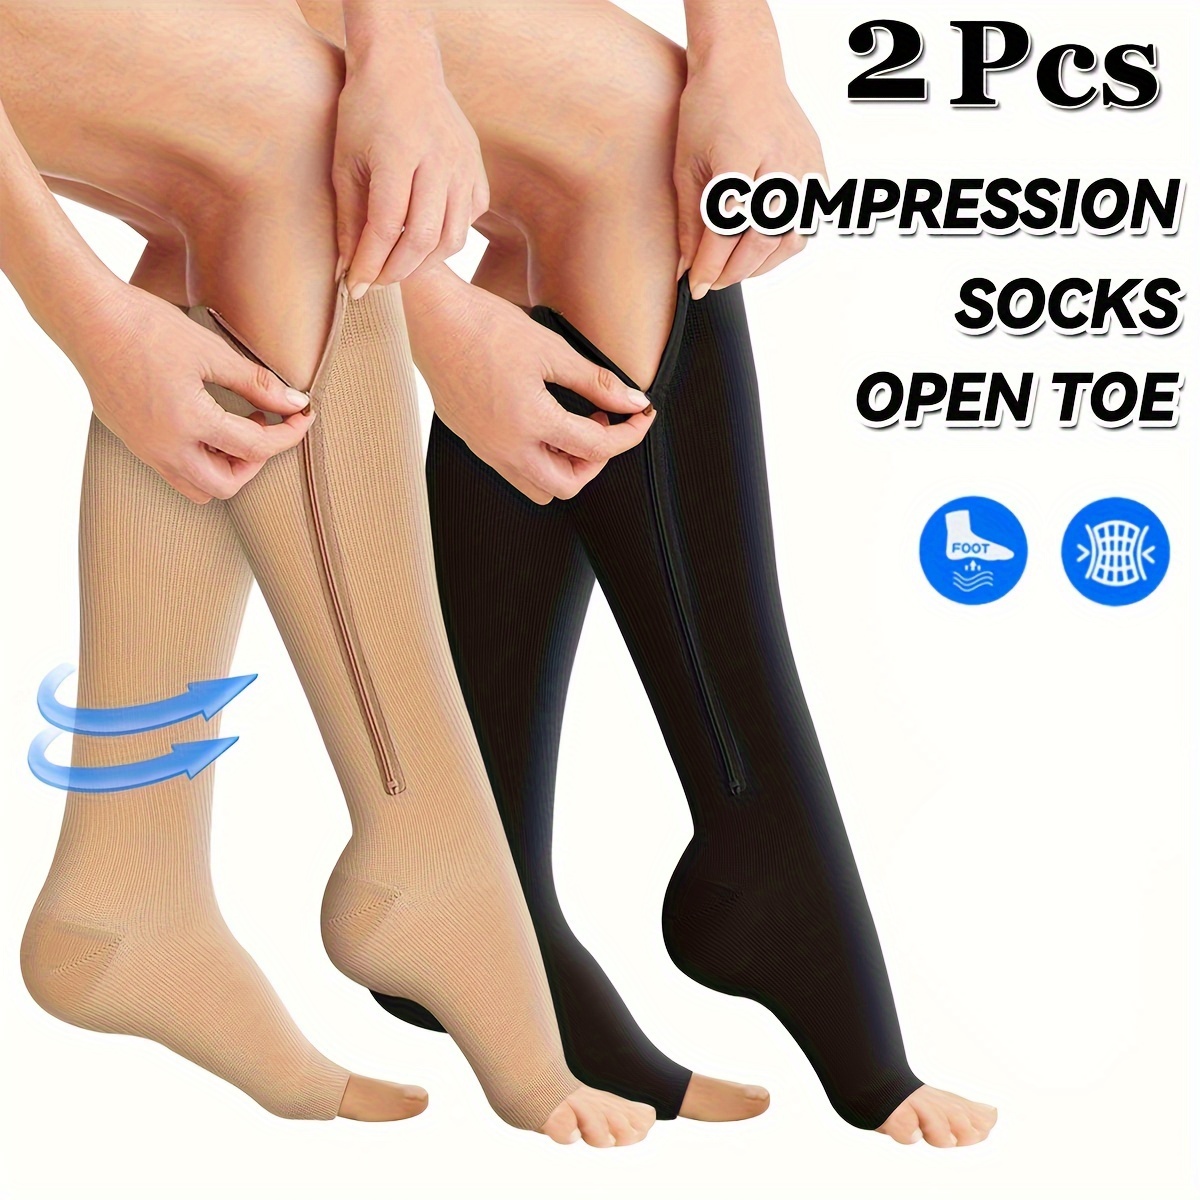 1 Pairs Zipper Compression Socks Open Toe Compression Stocking For